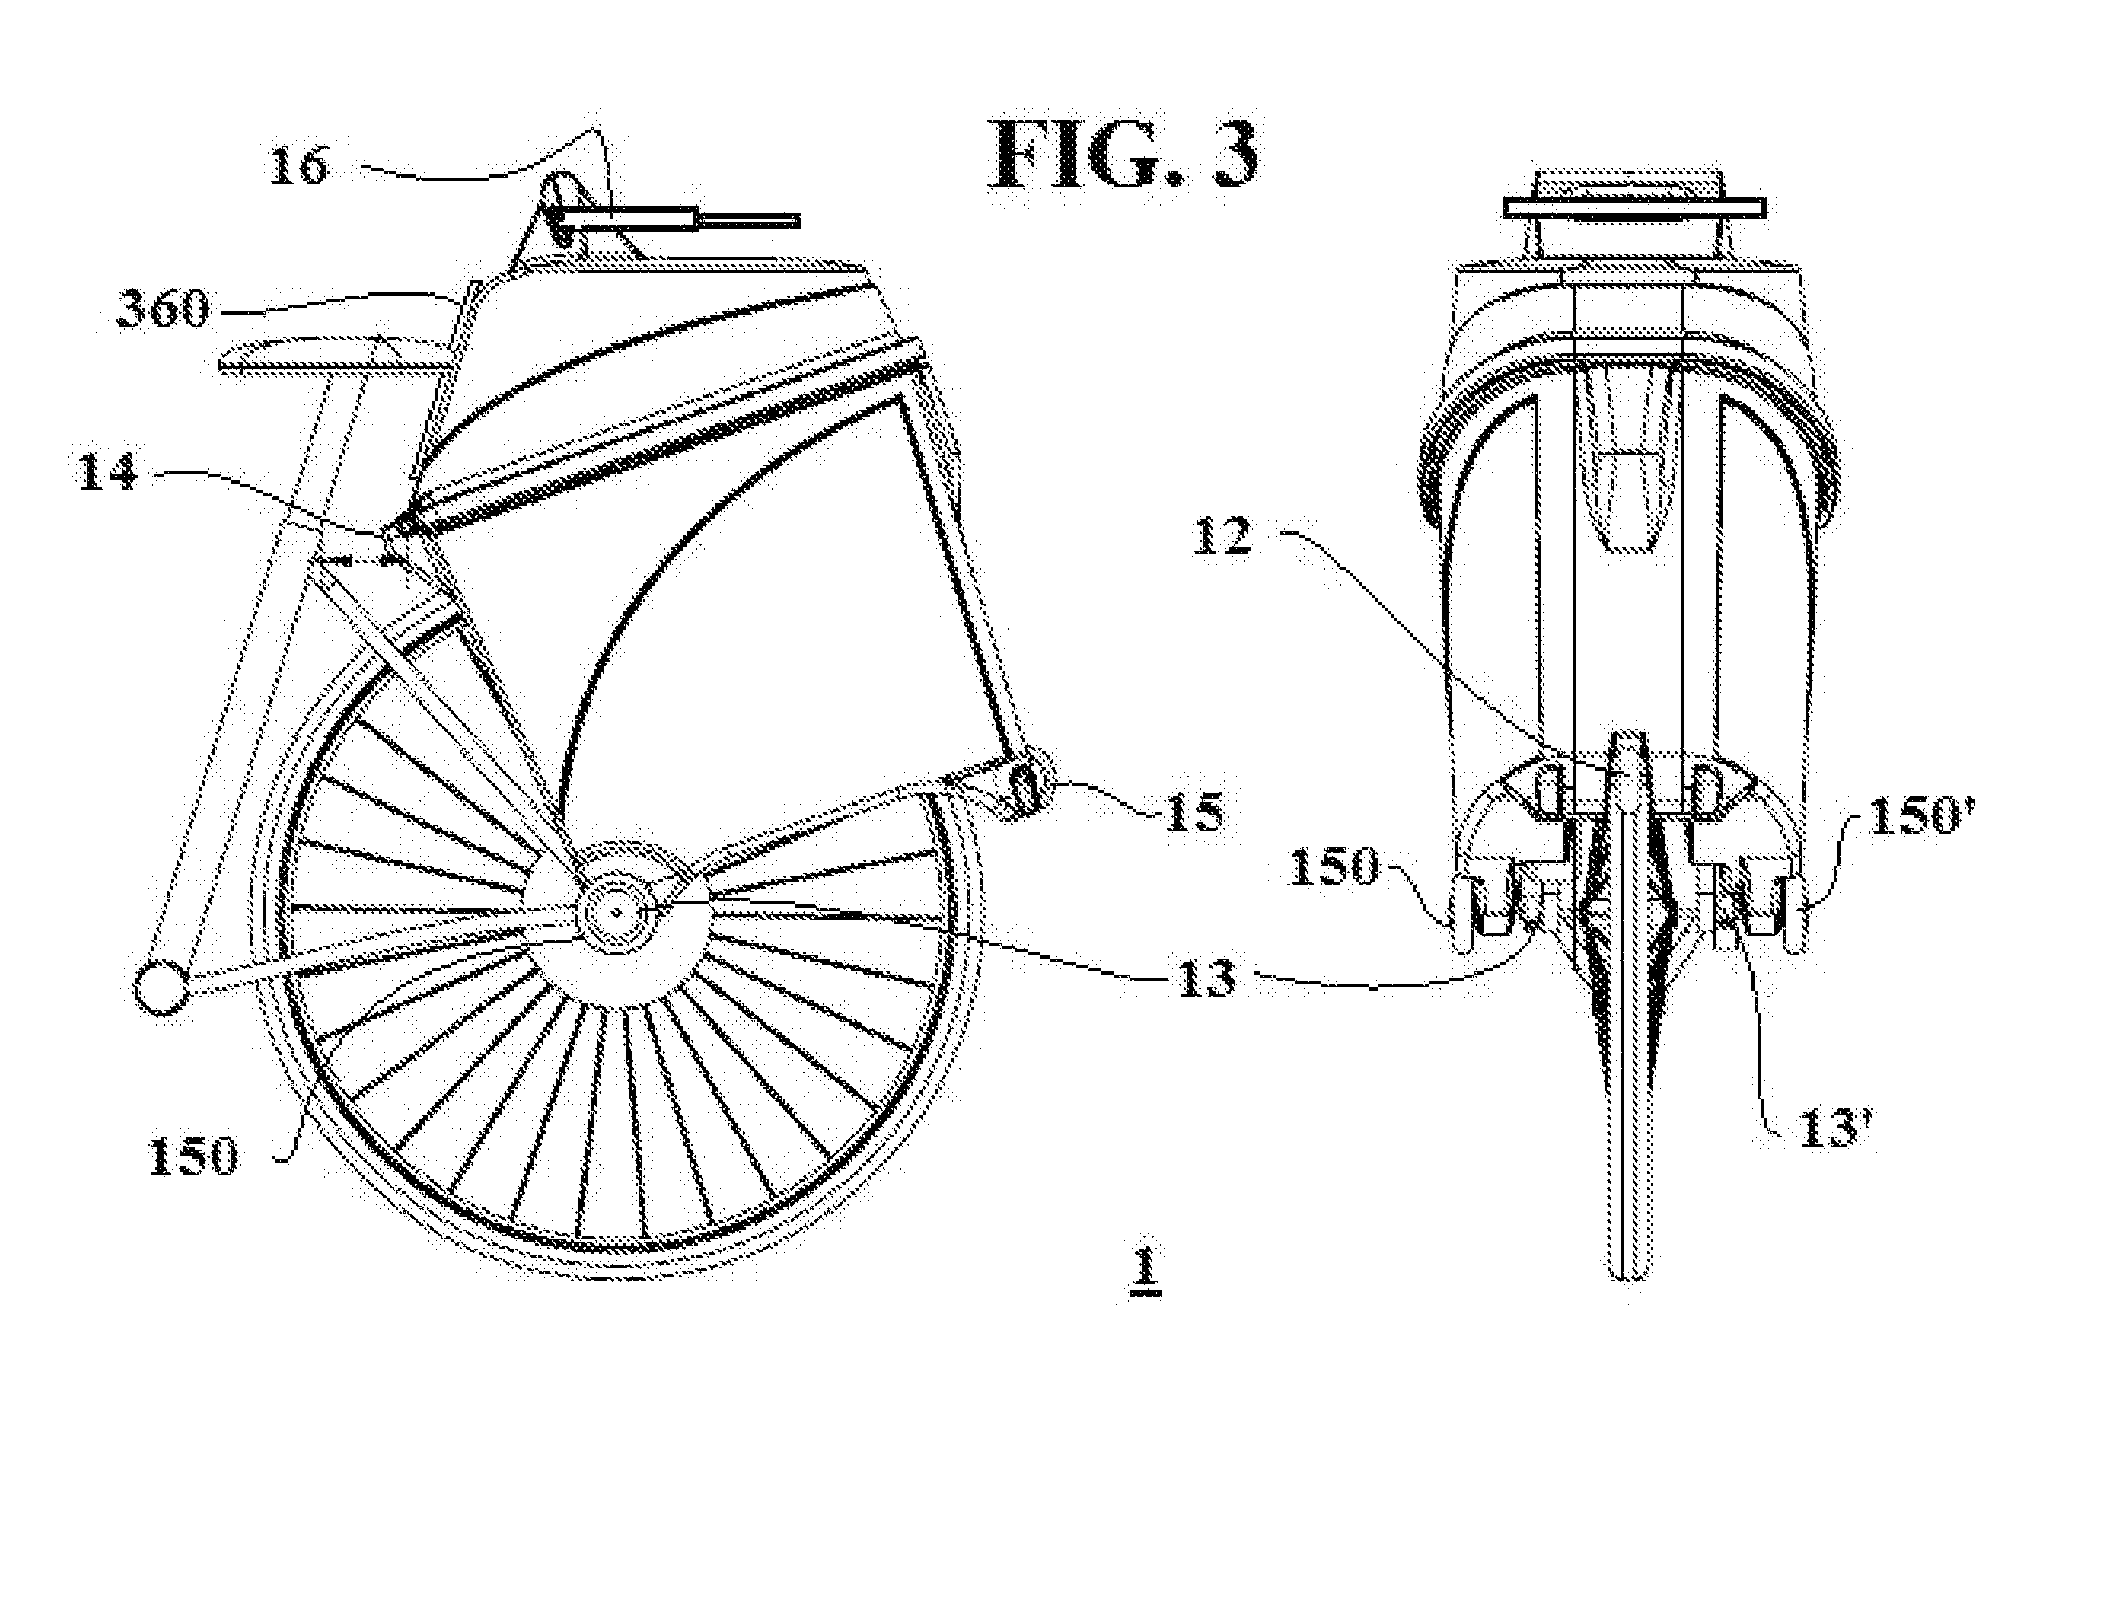 Method for mounting a cycle carrier system